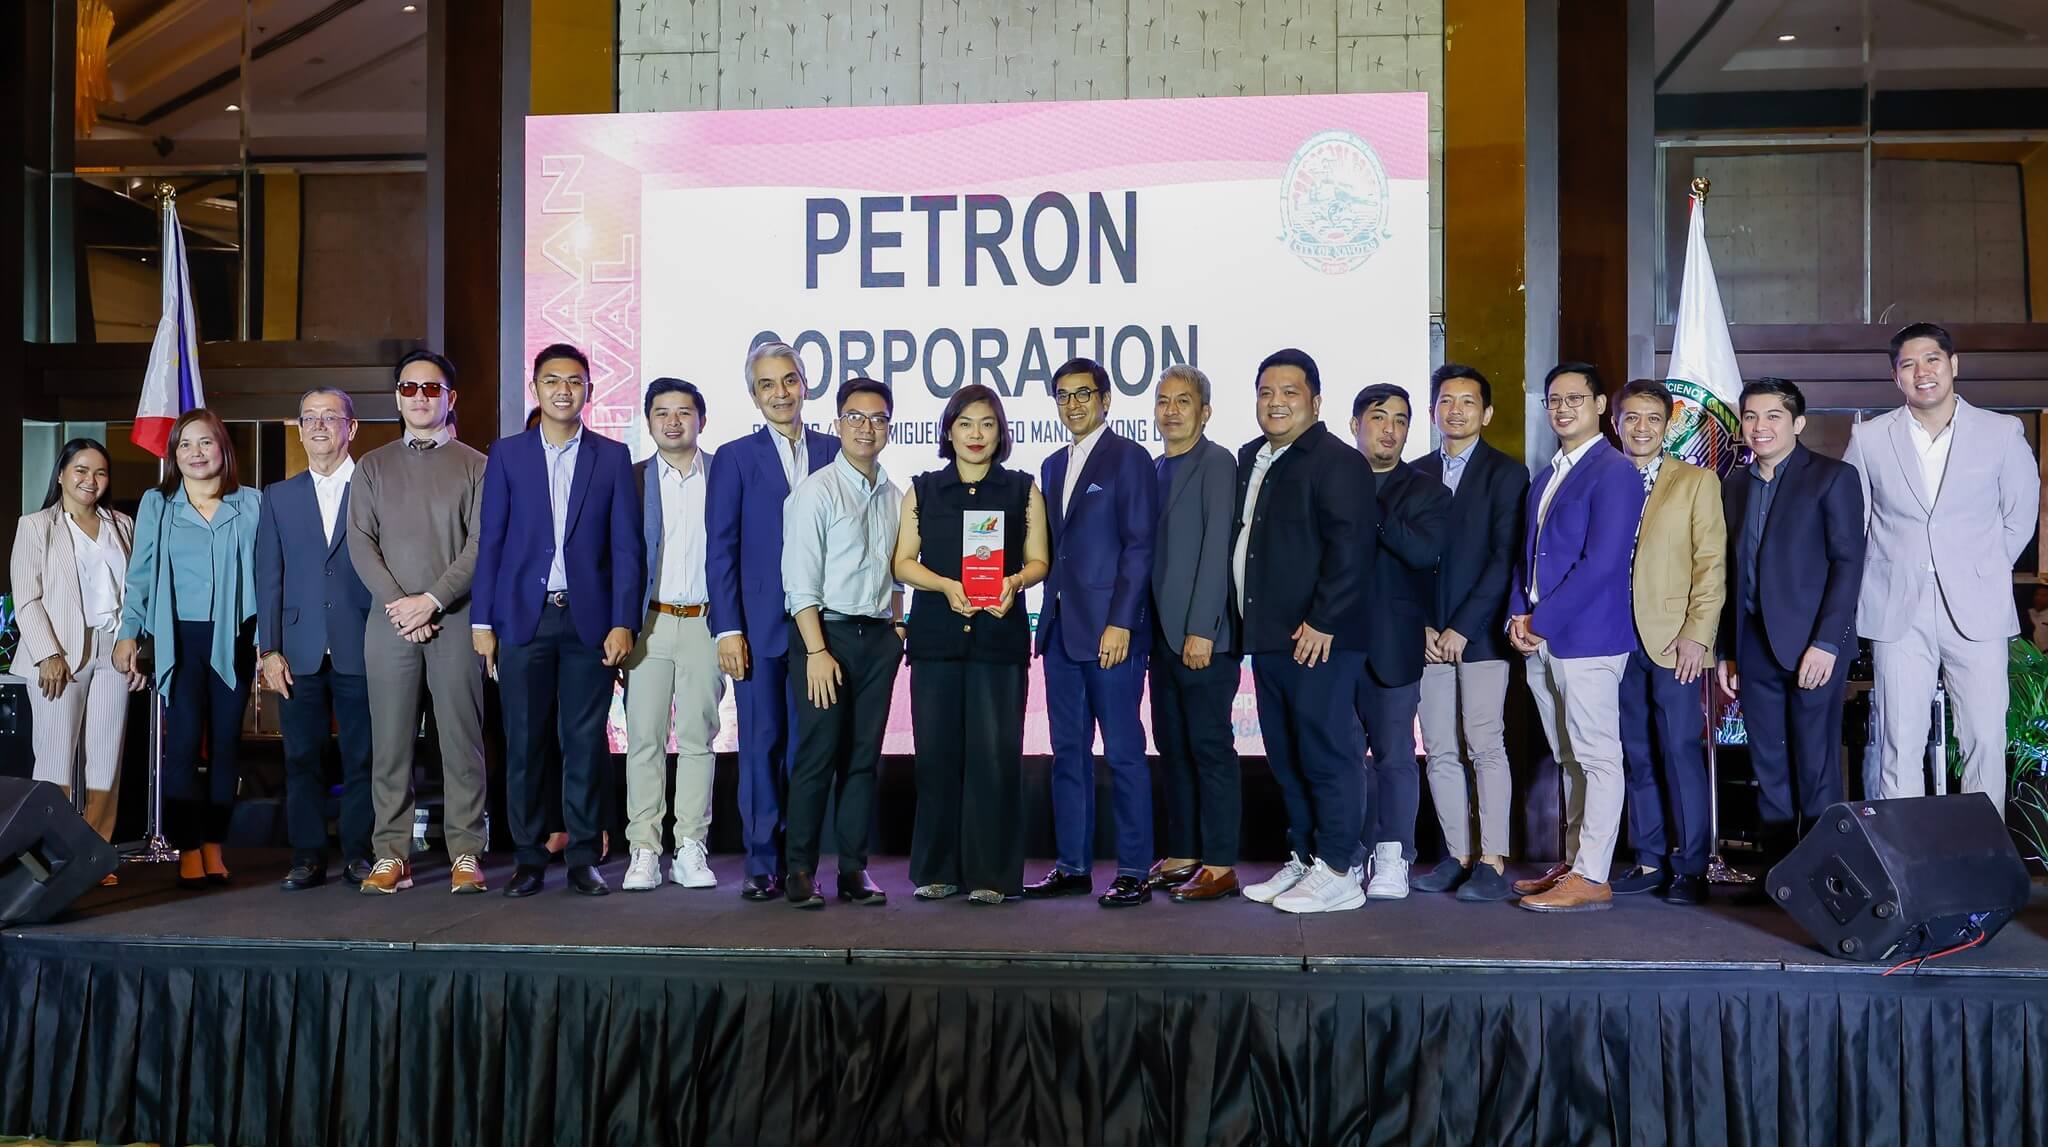 Petron receives top taxpayer award from Navotas local government